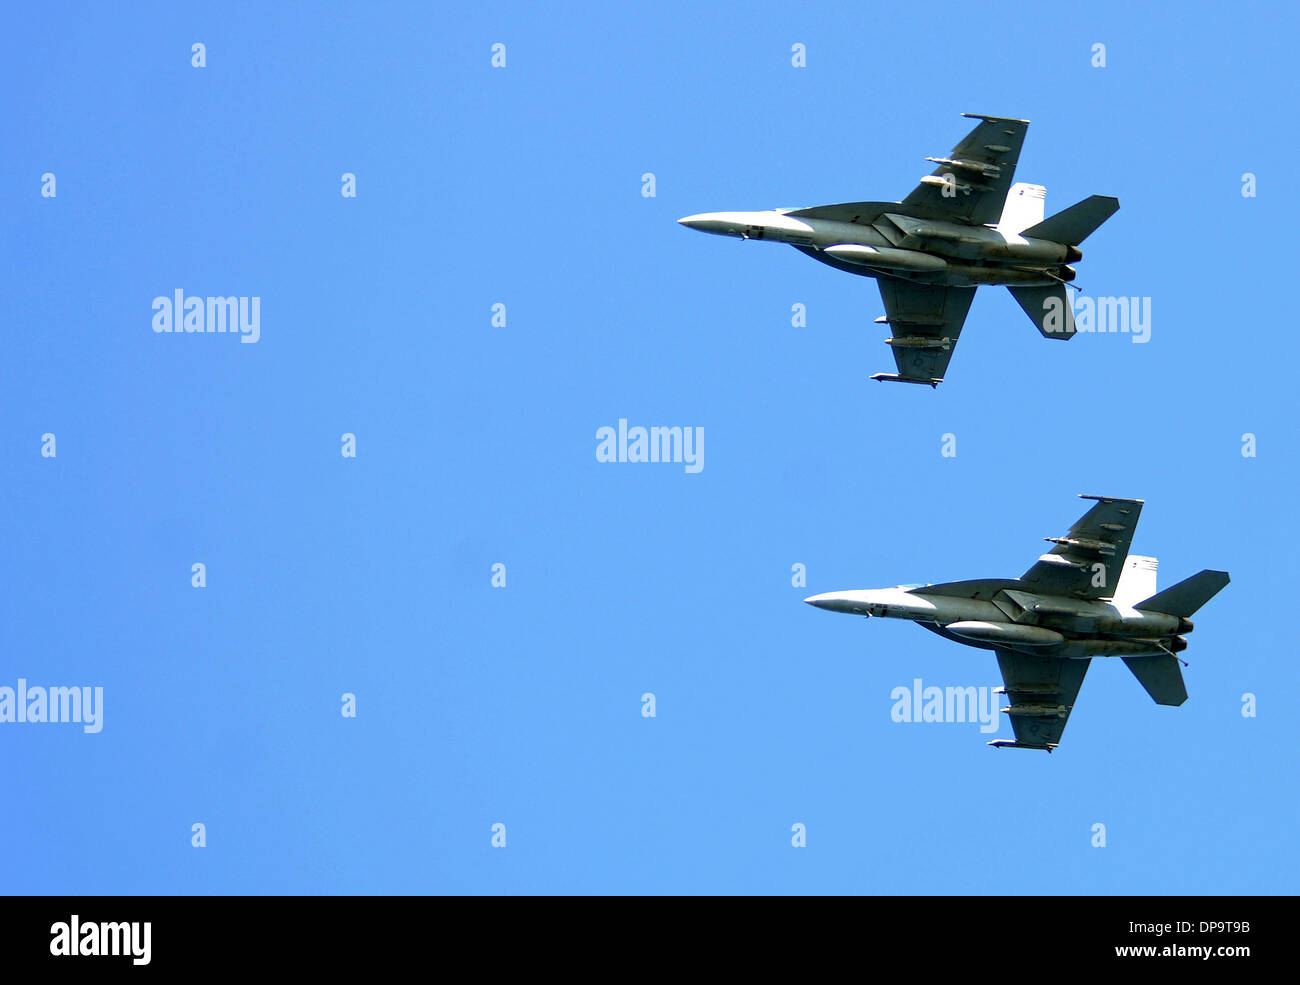 Two F/A-18F Super Hornet jet fighter aircraft in flight Stock Photo